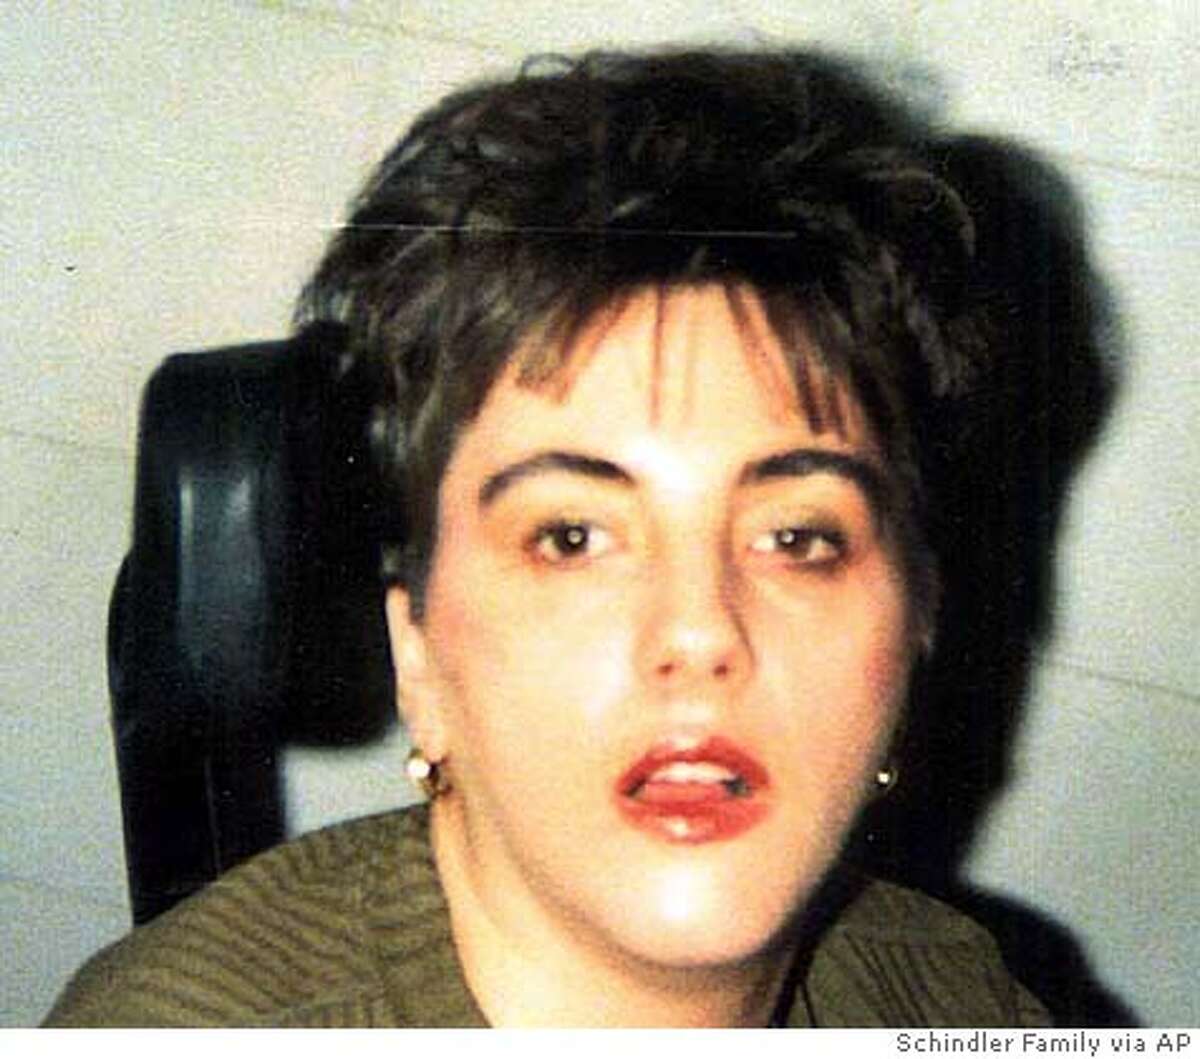 **FILE** Terri Schiavo is shown in this undated Schindler family photo taken shortly after she had a heart attack in 1990. The medical examiner's office plans to release its autopsy report Wednesday on Terri Schiavo _ findings her family hopes will shed light on the cause of the collapse that left her severely brain-damaged 15 years ago. Schiavo, 41, died March 31, nearly two weeks after the feeding tube that had kept her alive was removed under a court order obtained by her husband, Michael Schiavo. (AP Photo/Schindler Family Photo, File) ** **